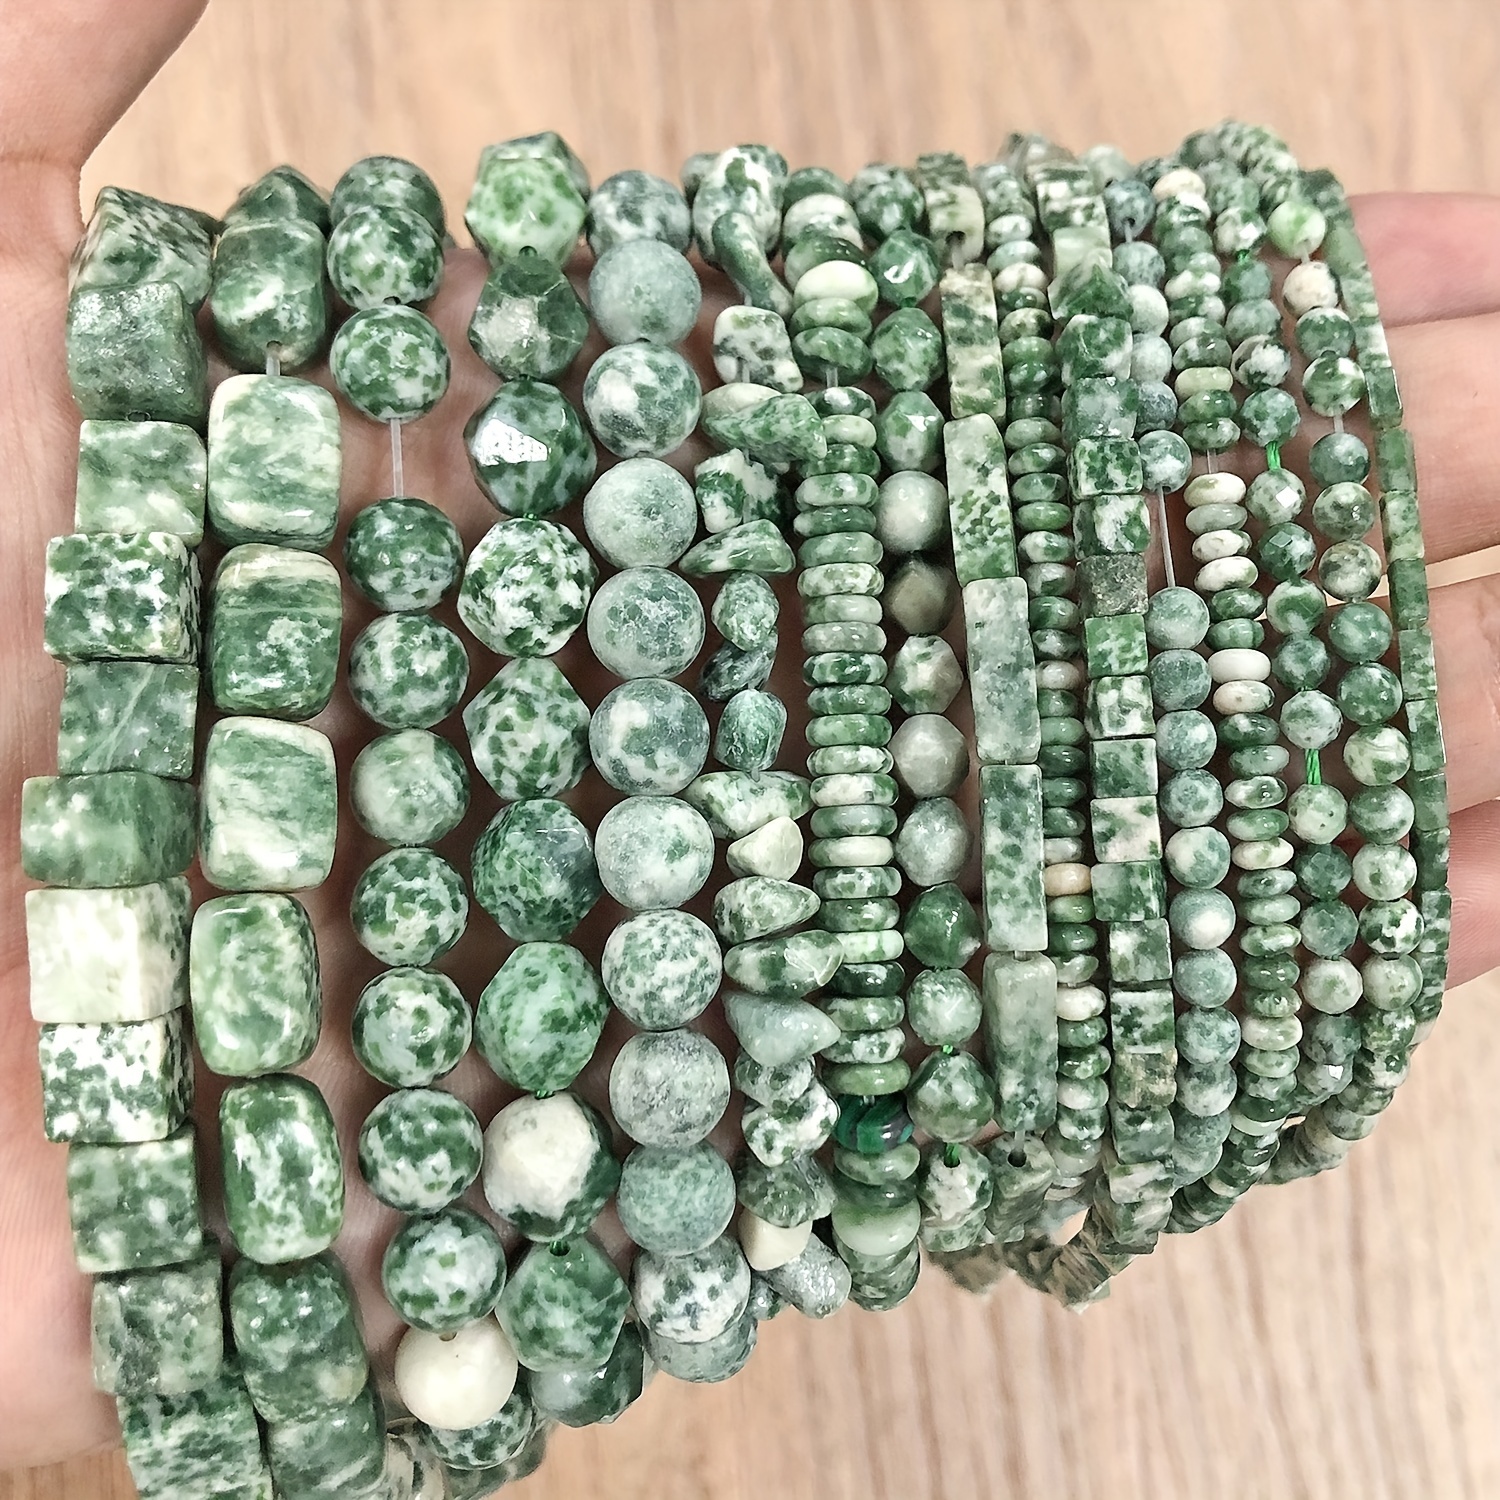  White and Green Recon Stone Beads, Craft Decor Beads